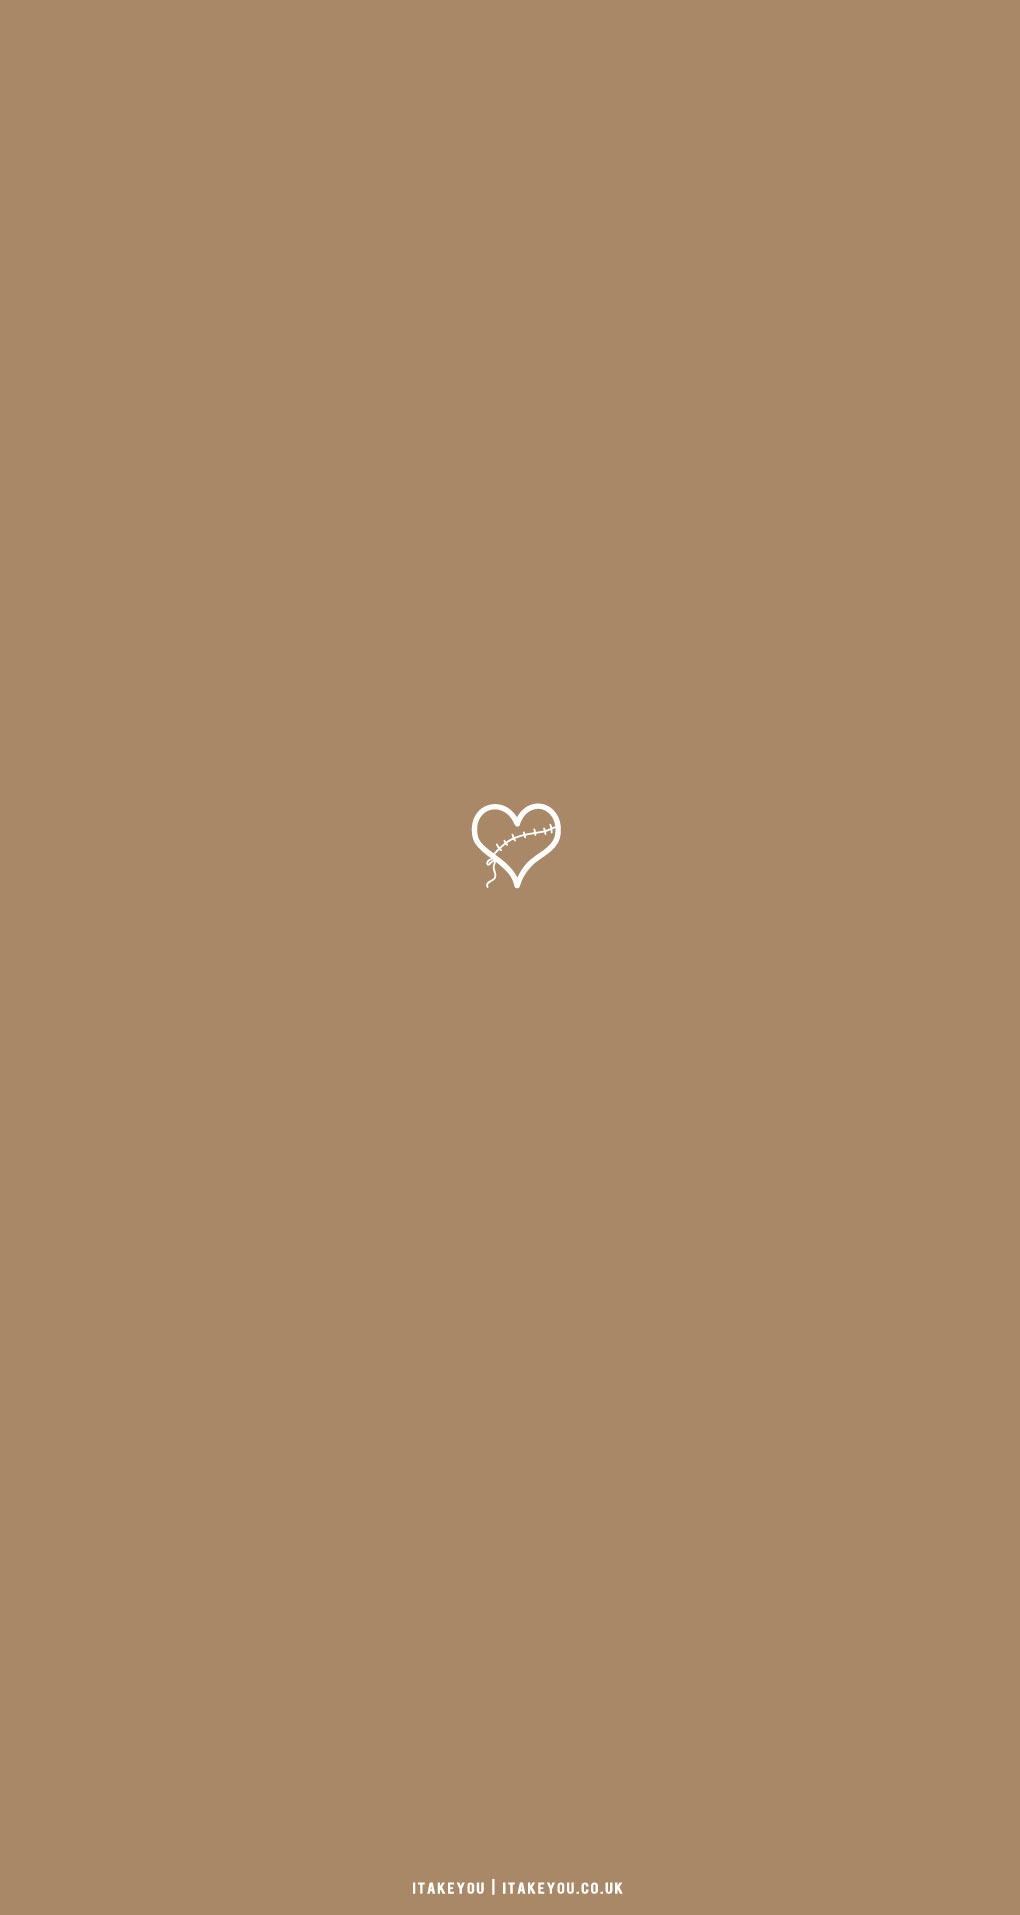 30 Cute Brown Aesthetic Wallpapers for Phone : Stitched Heart Minimalist I  Take You, Wedding Readings, Wedding Ideas, Wedding Dresses